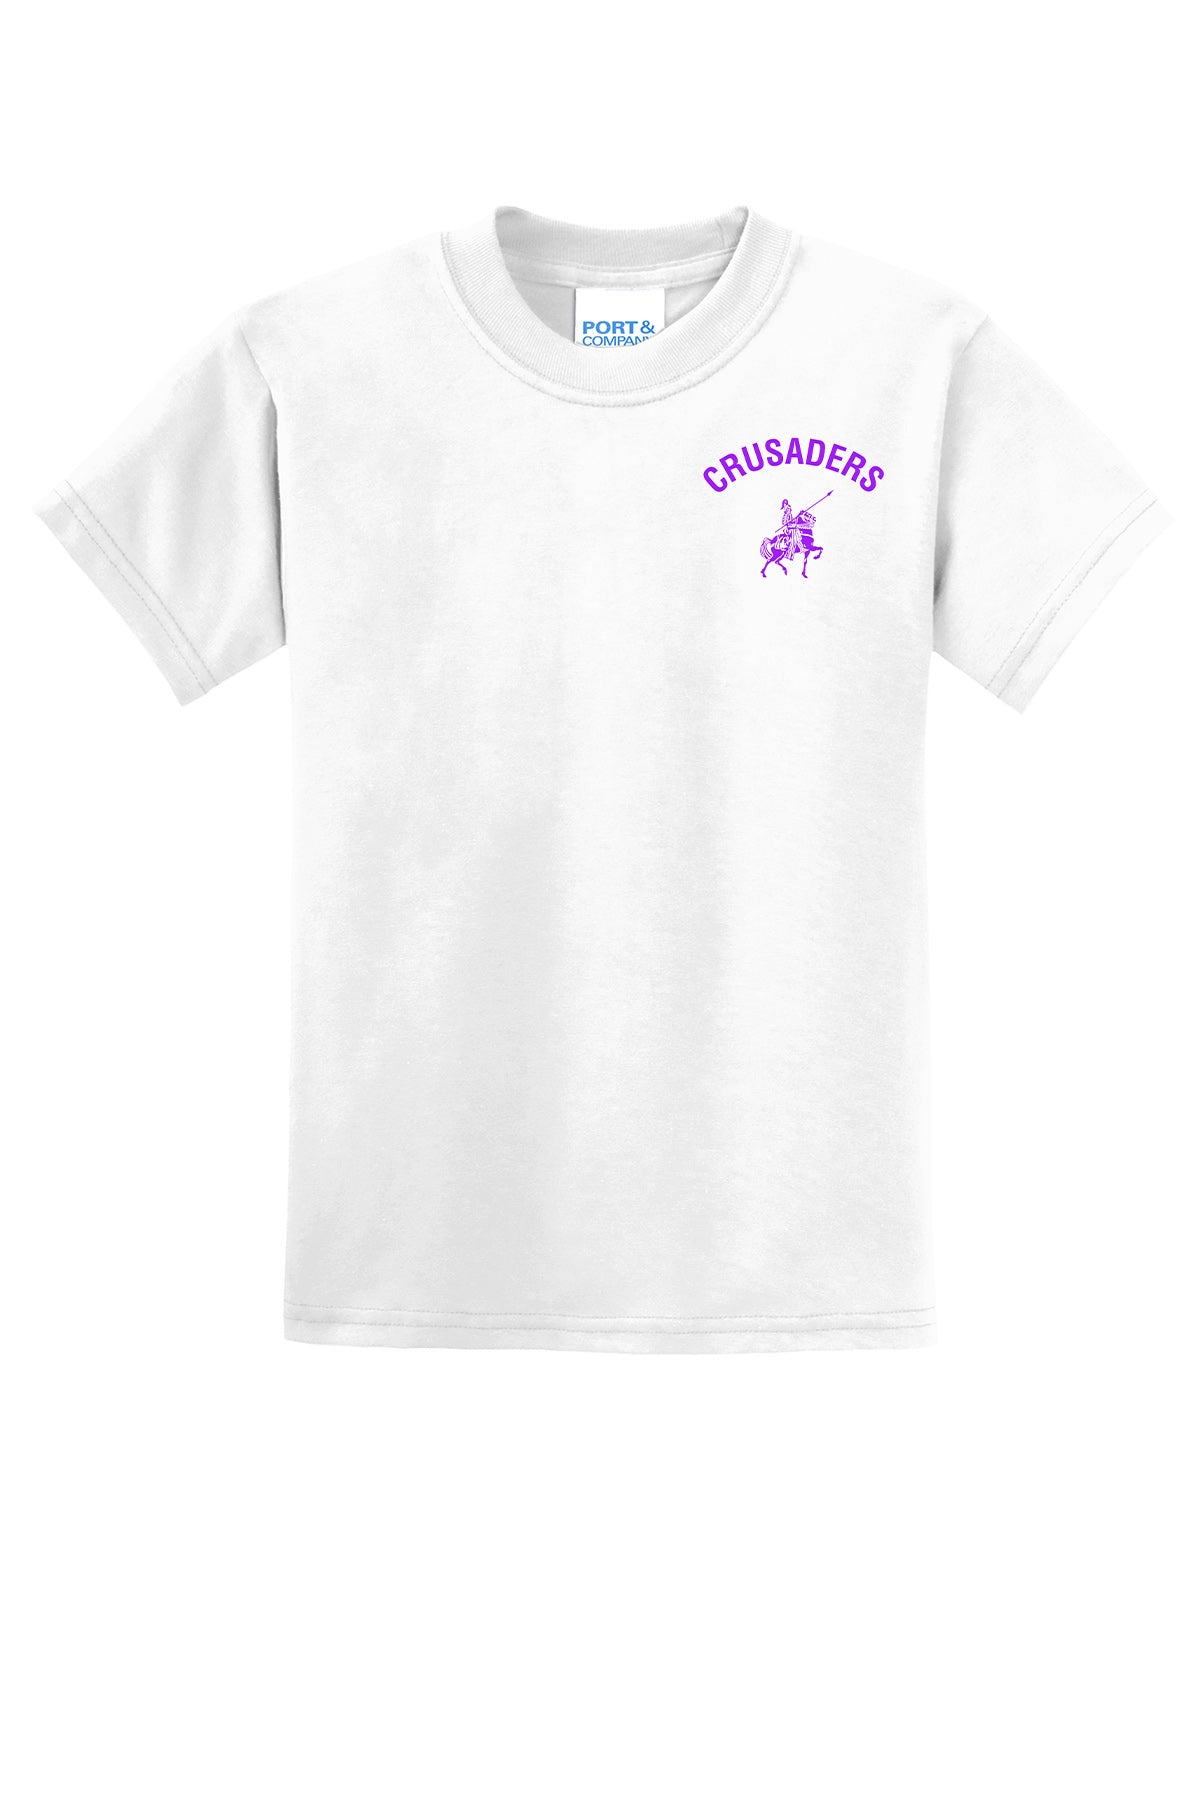 EG Travel Youth T-shirt "CCH" - PC55Y (color options available)